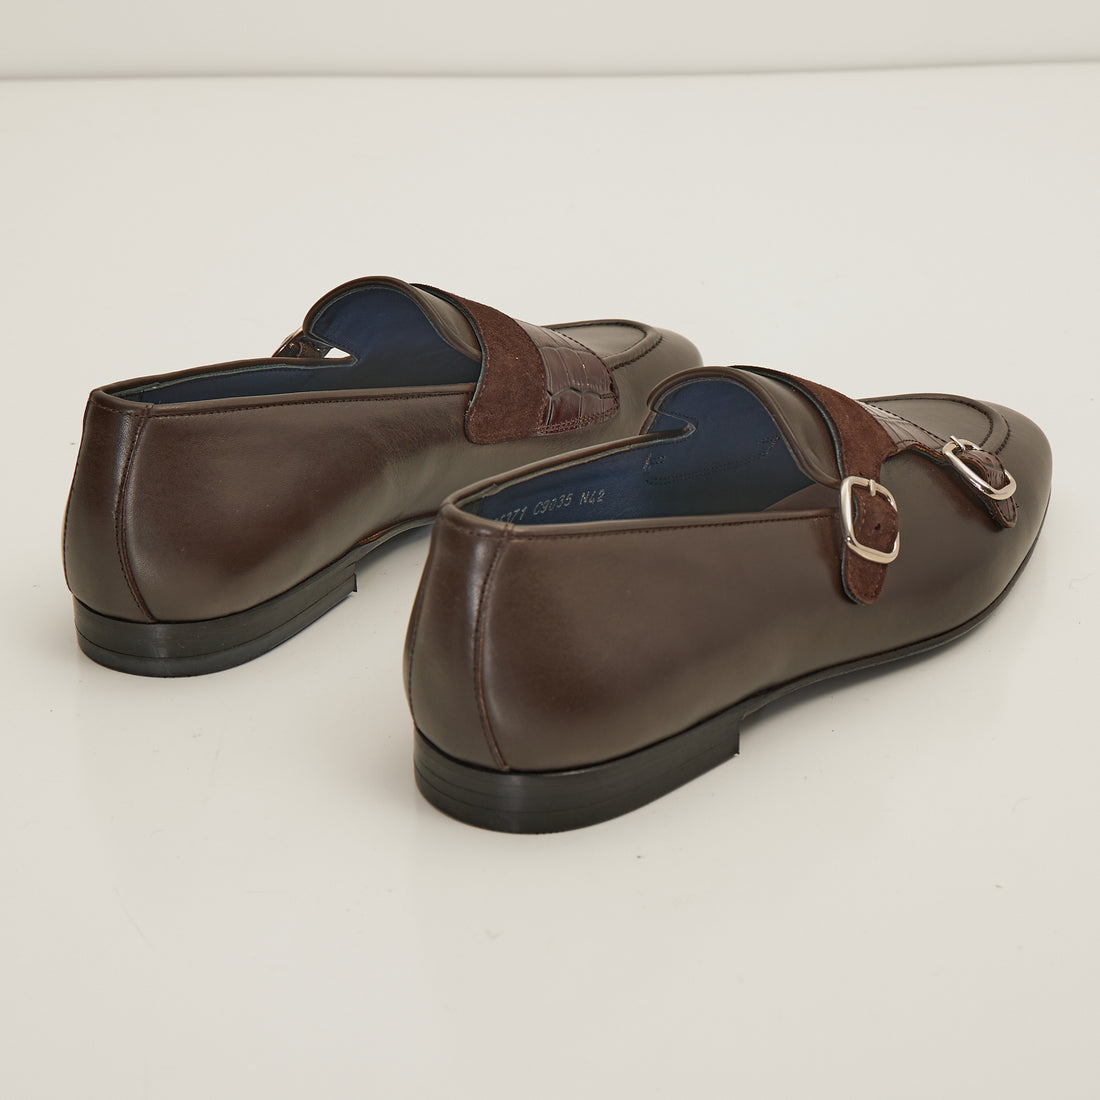 N° C9035 LEATHER DOUBLE MONK STRAP SHOES - BROWN